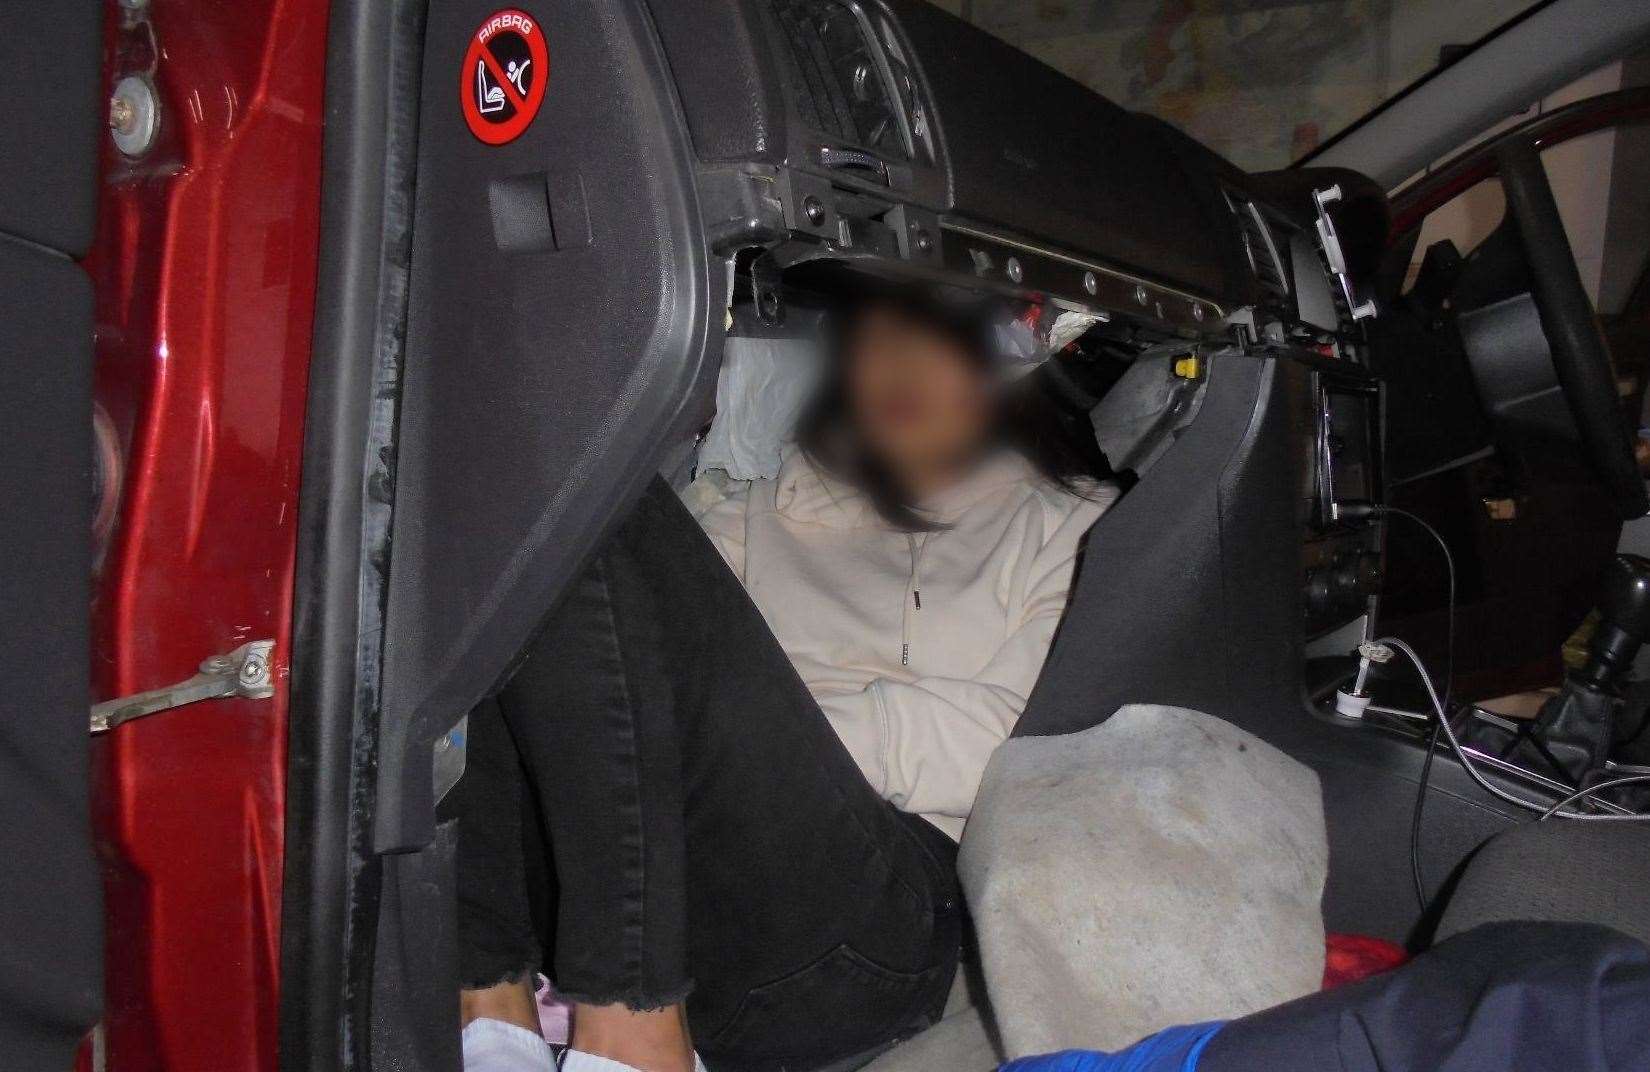 It is not known how long the woman remained hidden in the tiny space in the car